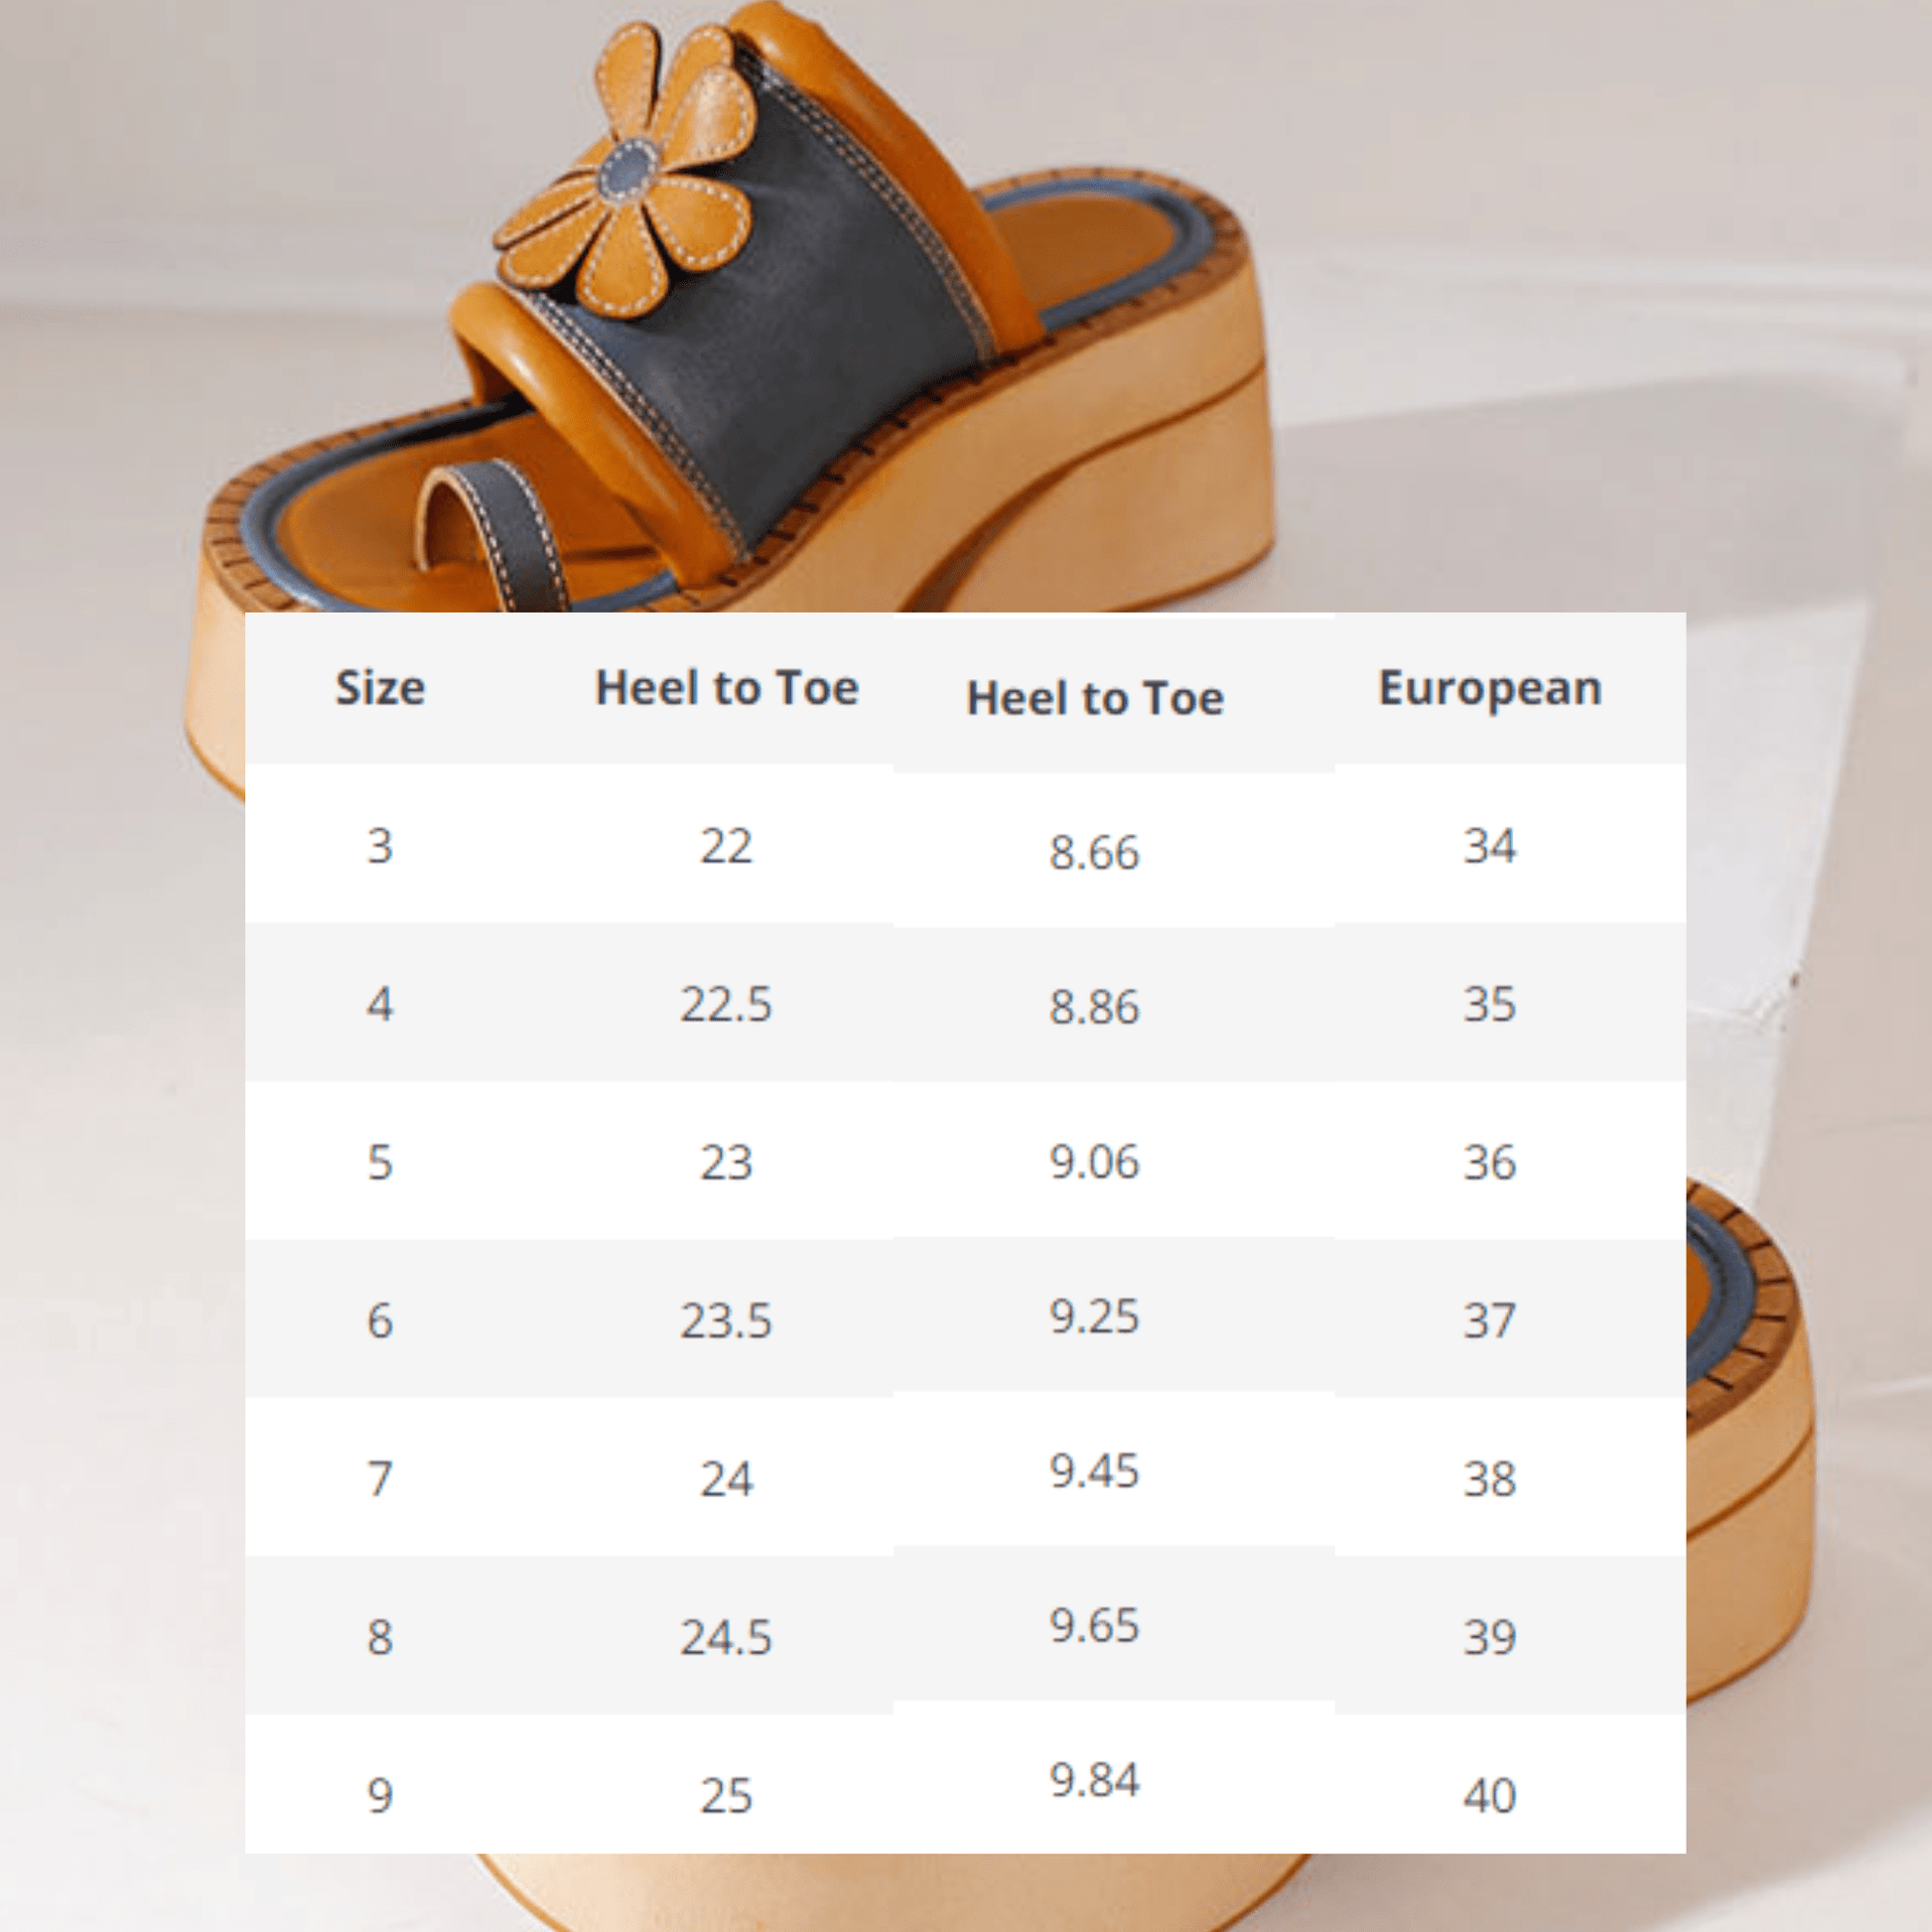 Vintage-inspired Leather Wedges Sandals For Her - Trendiesty Worldwide